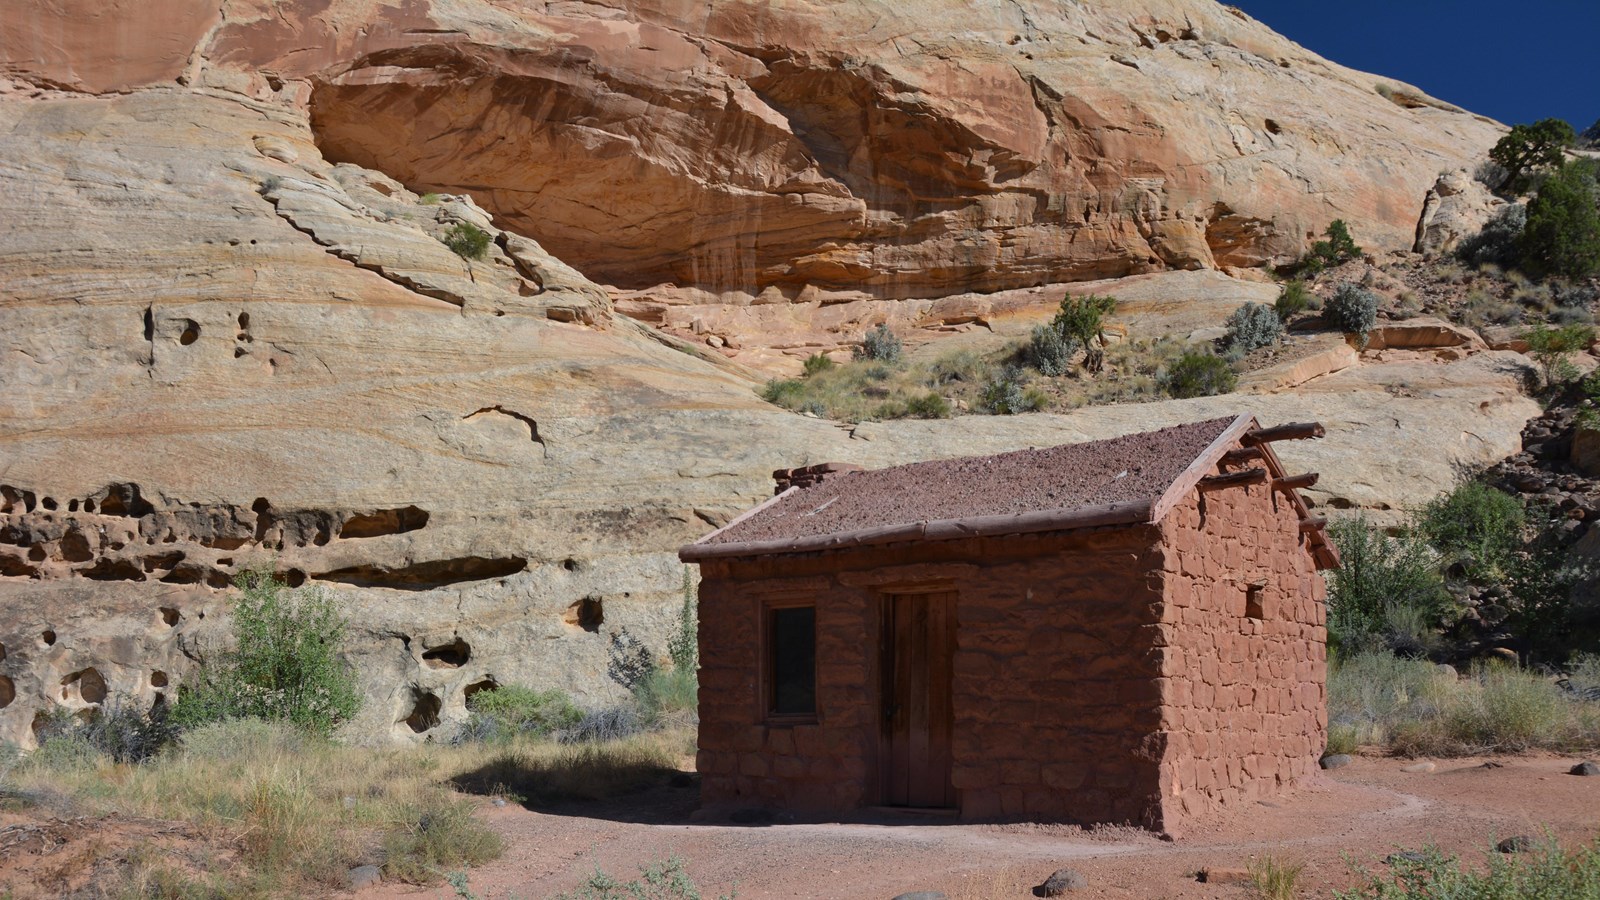 Small stone cabin with dirt roof, one door, one window, below cliffs.